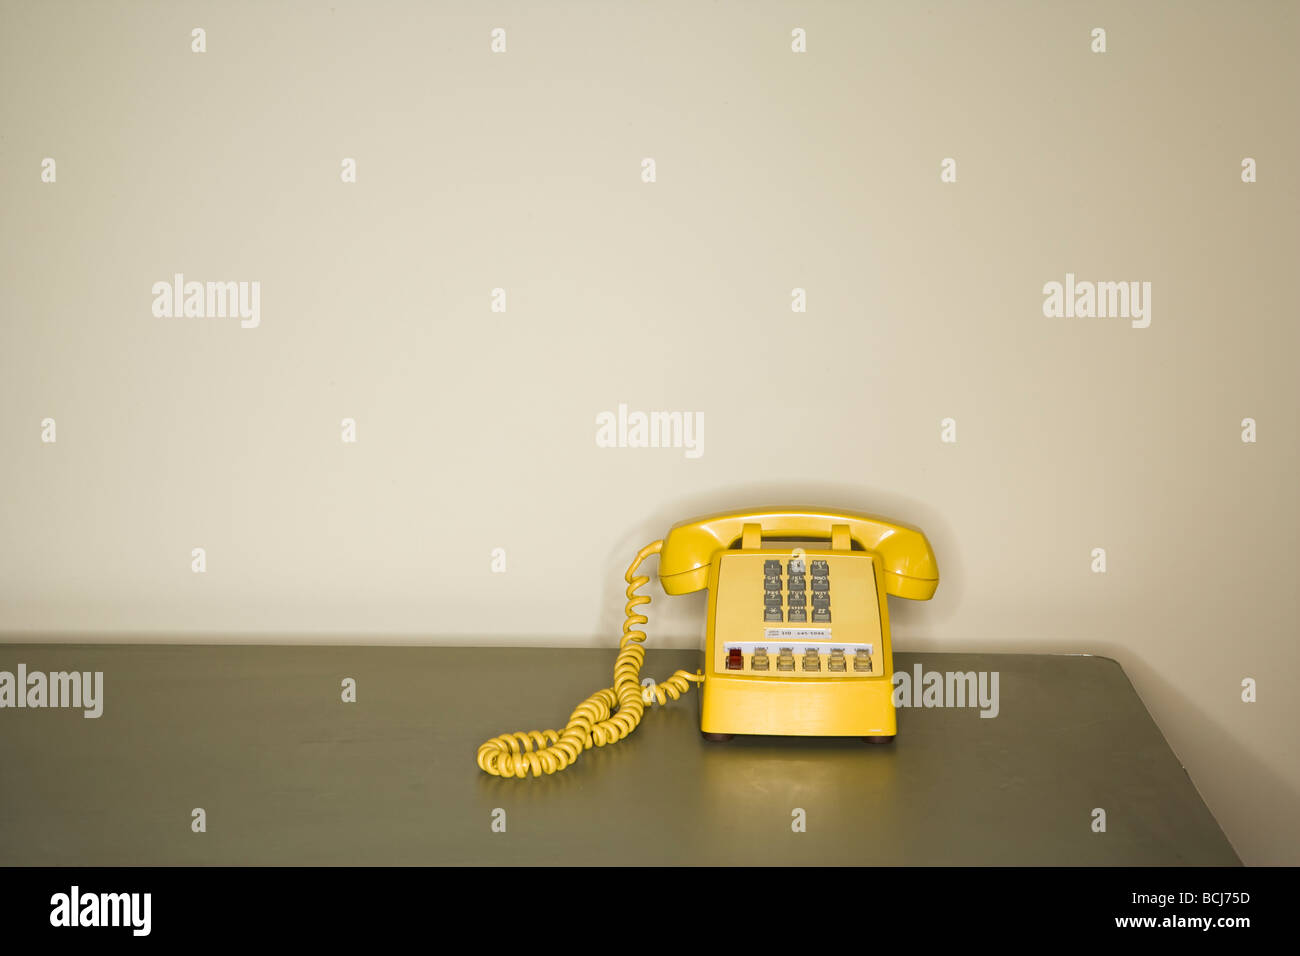 Yellow touch tone telephone sitting on metal desk in front of white wall. Stock Photo